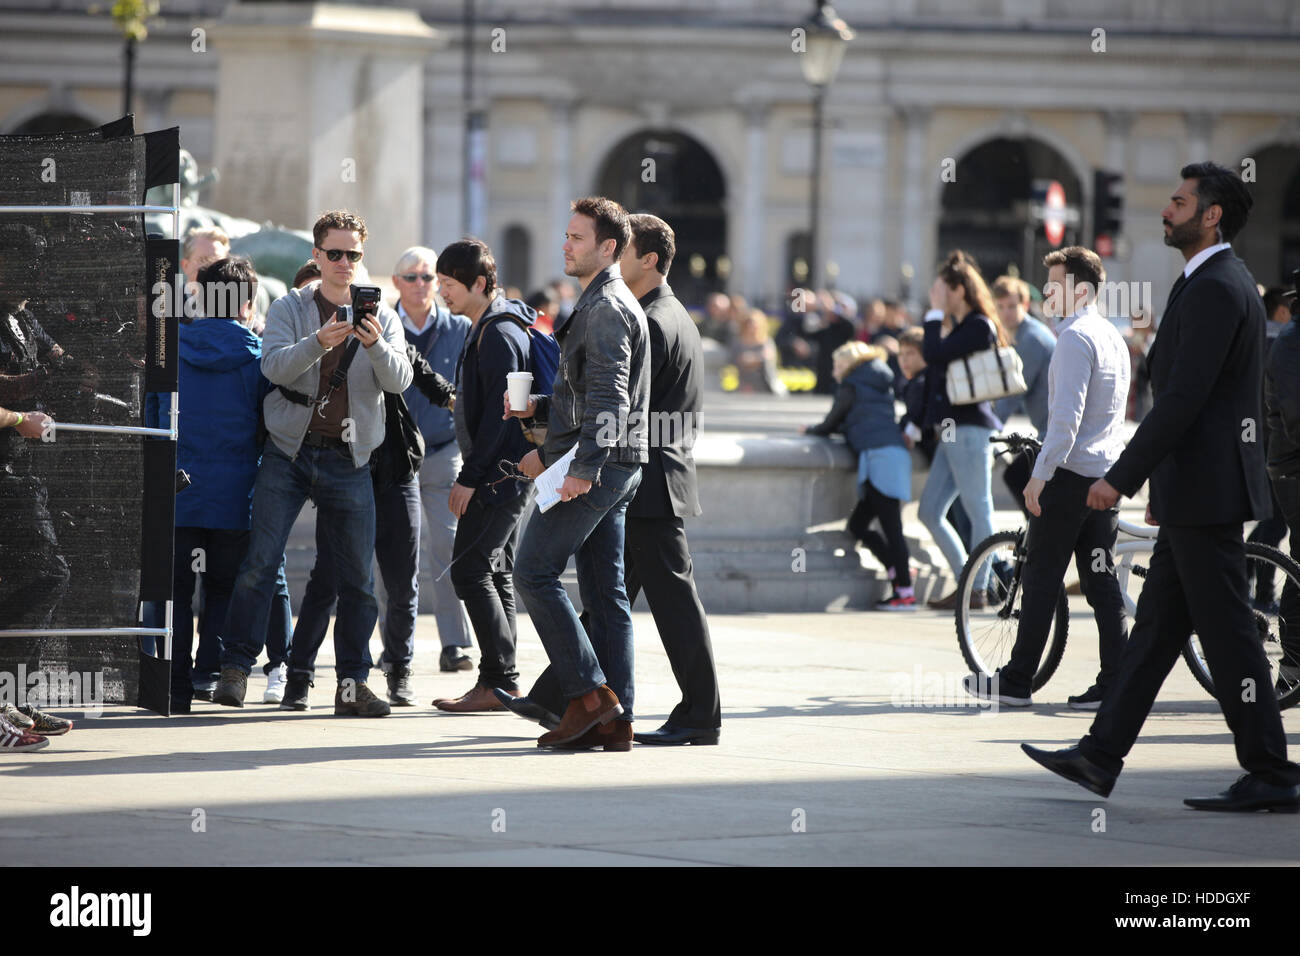 Filming of 'American Assassin' in London. Actor Taylor Kitsch films a scene alongside tourists and Londoners in Trafalgar Square. Camera crews were spotted on the roof of a museum as filming took place on the square below.  Featuring: Taylor Kitsch Where: Stock Photo